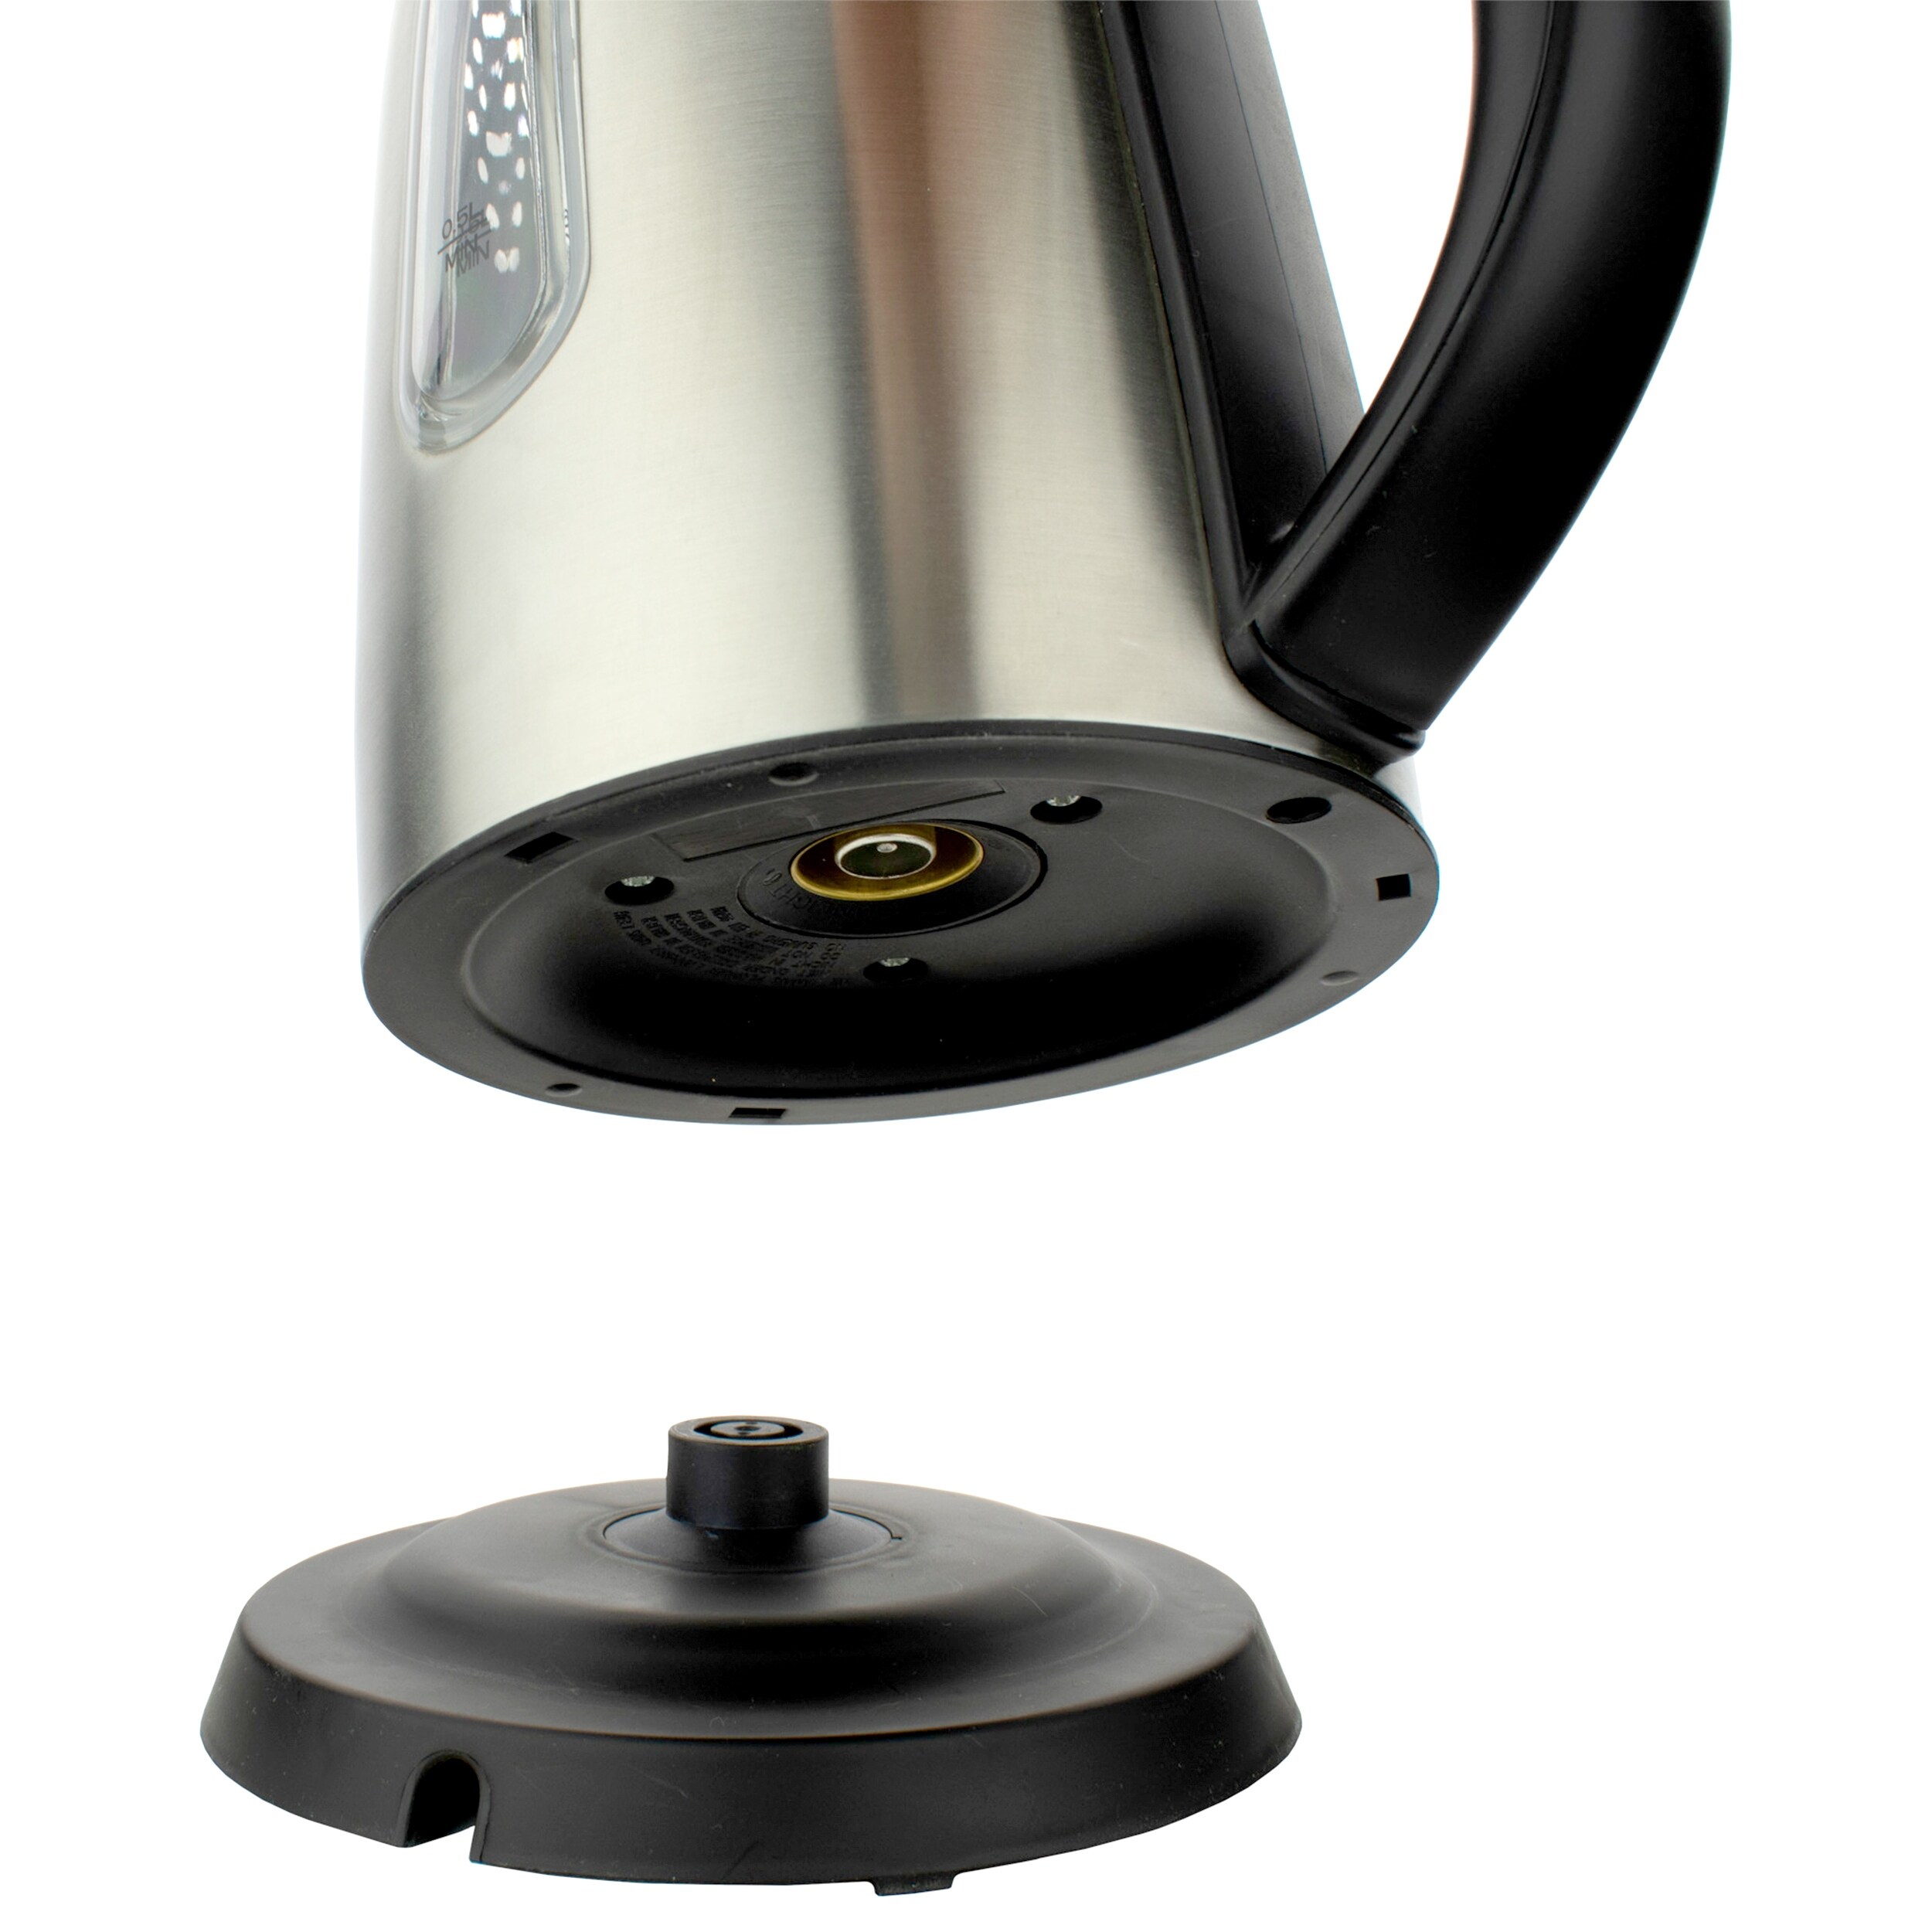 Brentwood Kt-1800 2L Stainless Steel Cordless Electric Kettle - Bed Bath &  Beyond - 18827543